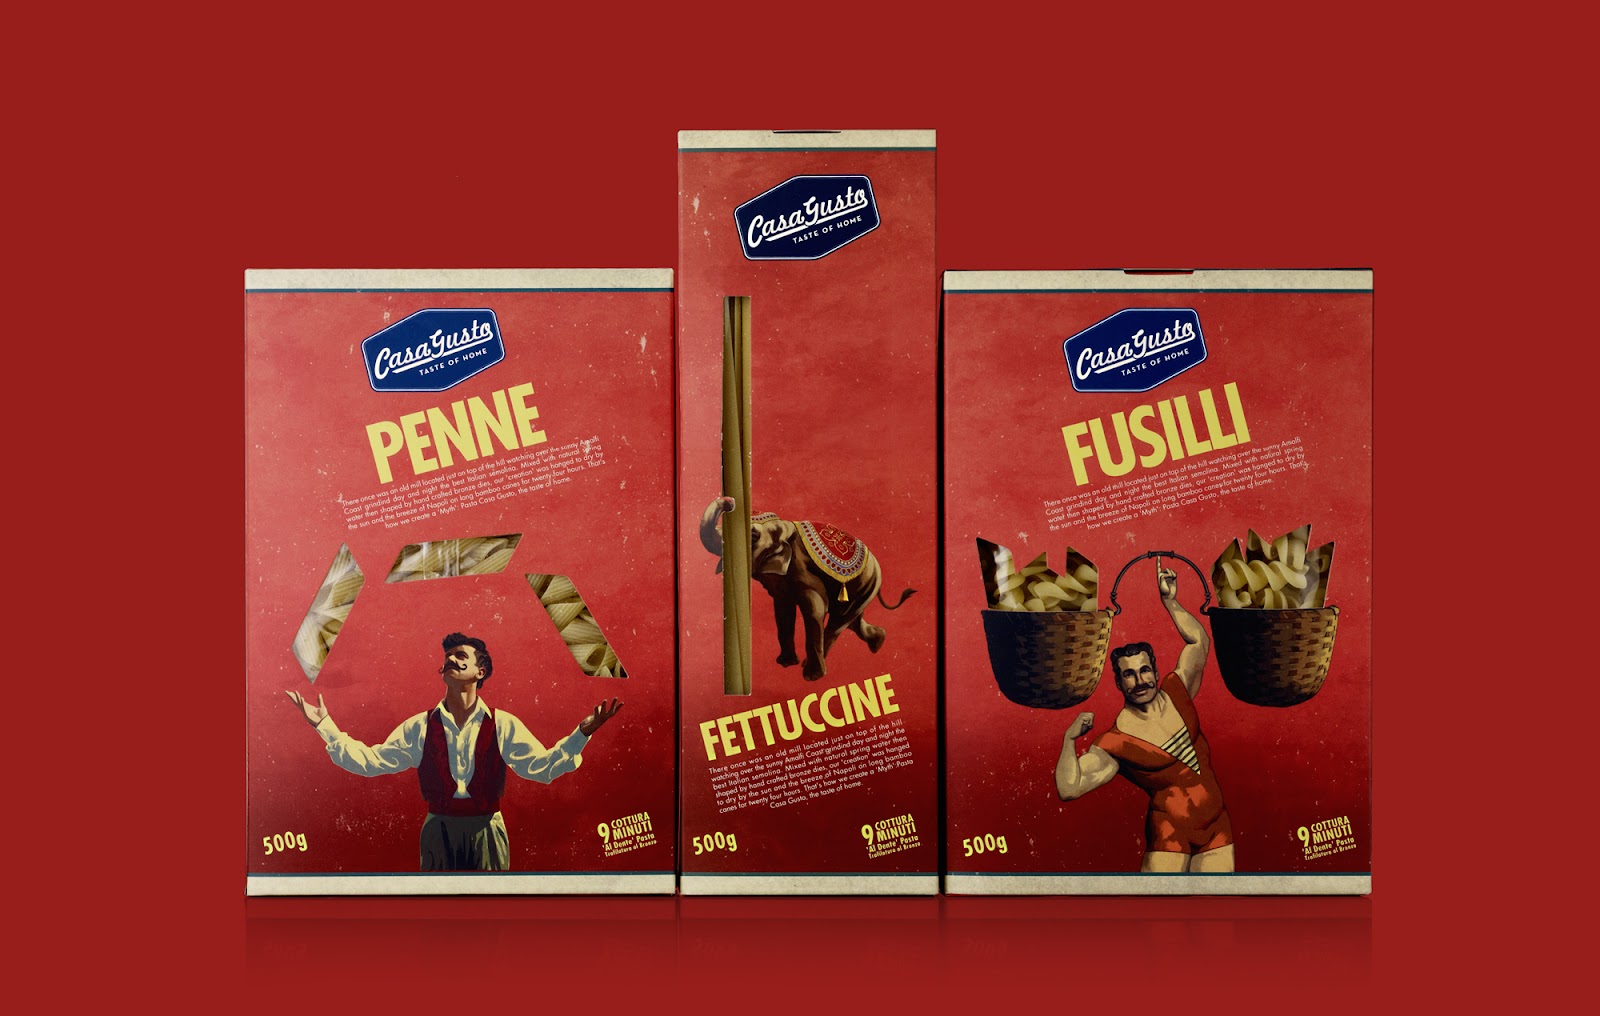 Casa Gusto pasta packaging design featuring circus characters to reflect the brand's unique story.